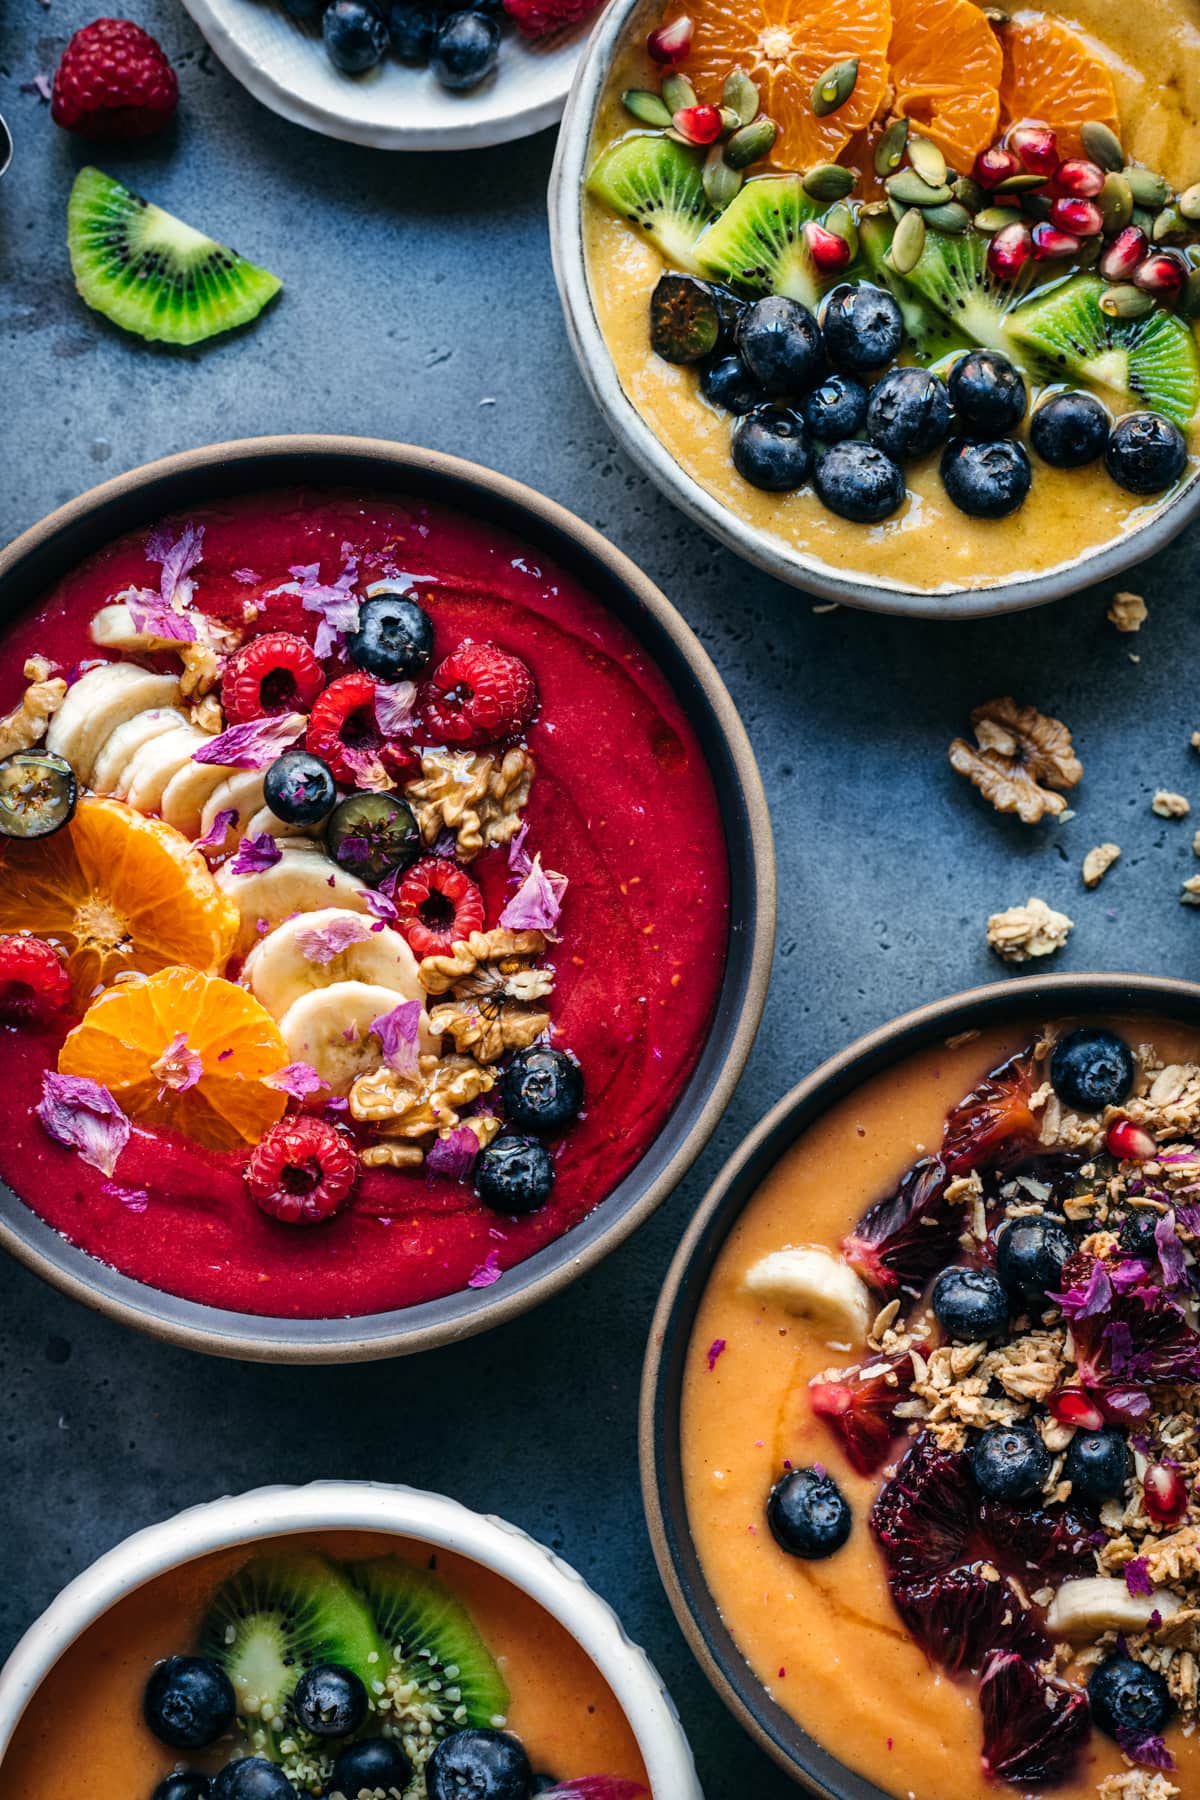 overhead view of multiple red, orange and yellow smoothie bowls with fresh fruit and granola toppings.